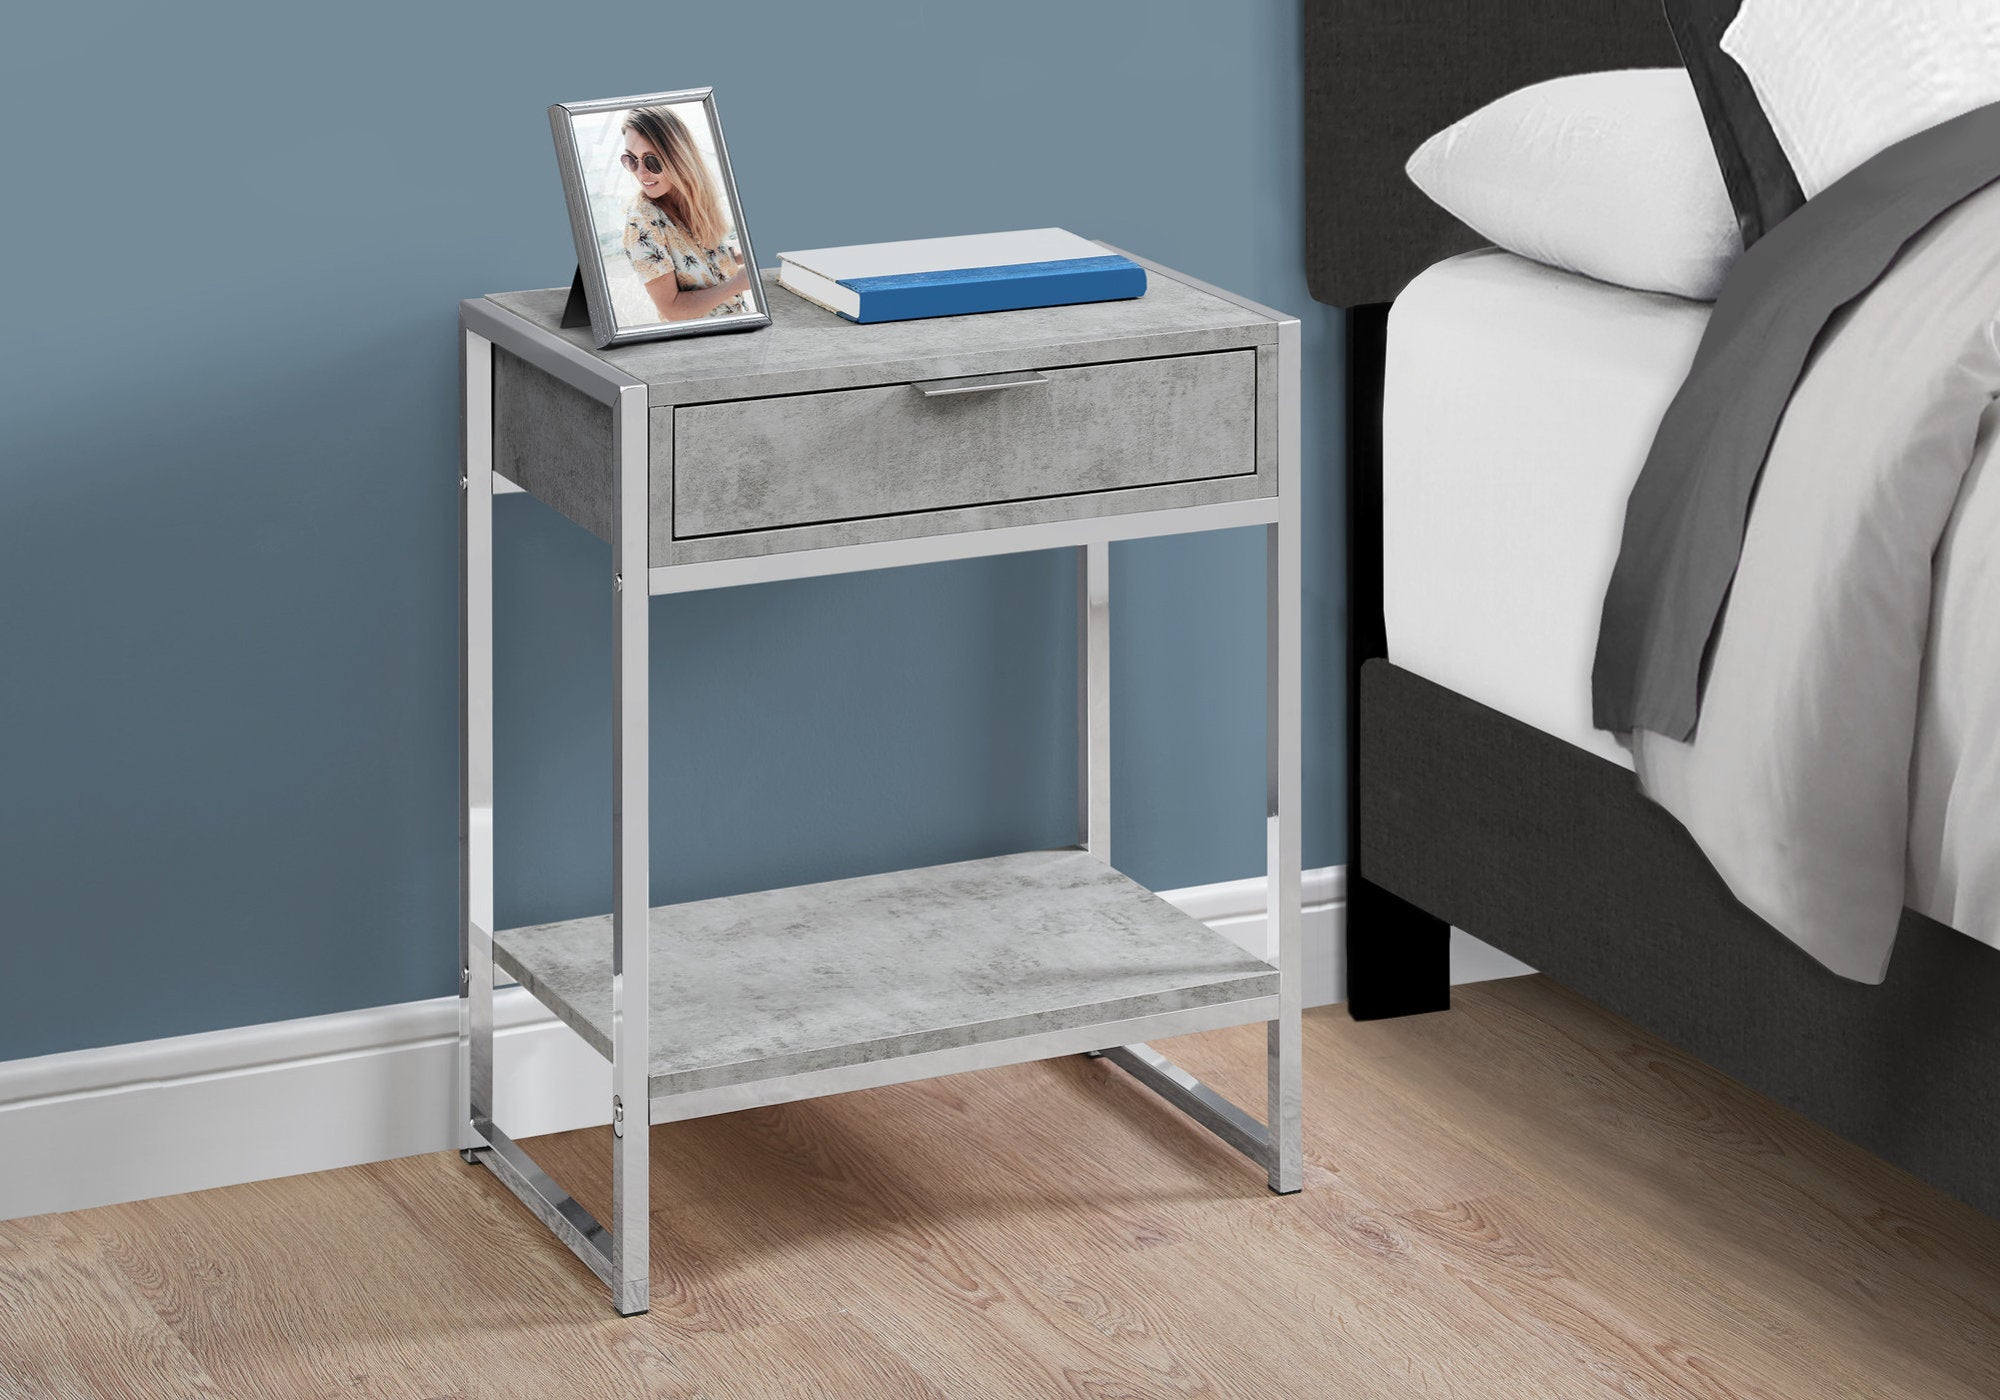 MN-893481    Accent Table, Side, End, Nightstand, Lamp, Living Room, Bedroom, Metal Legs, Laminate, Grey Cement Look, Chrome, Contemporary, Modern